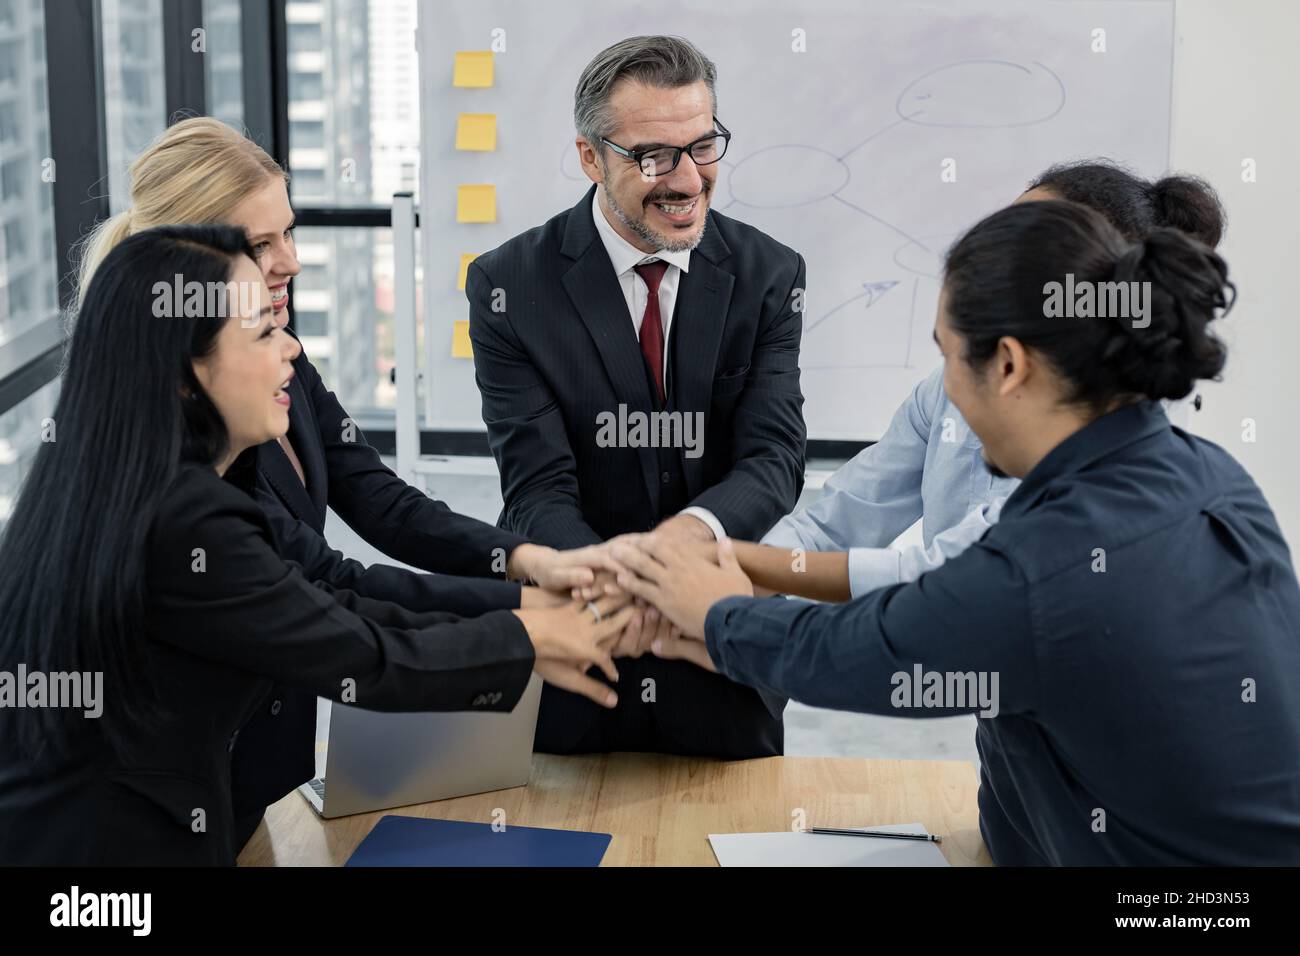 Business team showing unity with their hands together. Success business team concept. Business people putting their hands together. Stock Photo